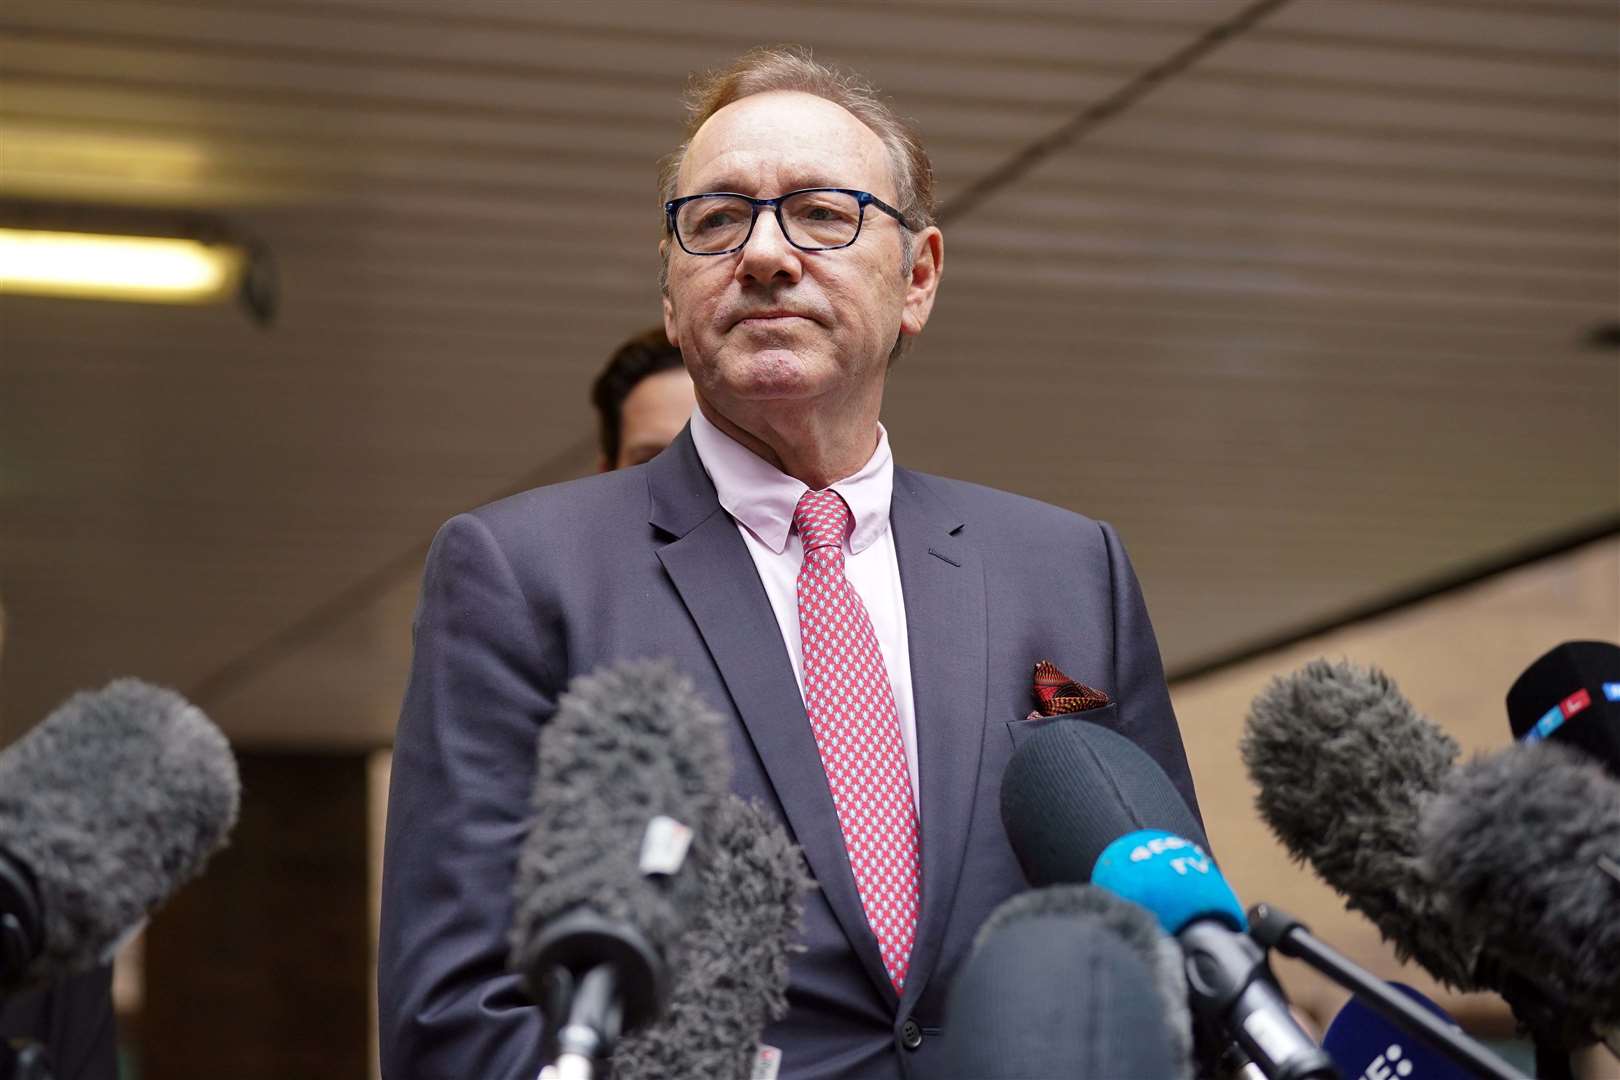 Actor Kevin Spacey speaks to the media outside Southwark Crown Court, London, after he was found not guilty of sexually assaulting four men following a trial (Lucy North/PA)